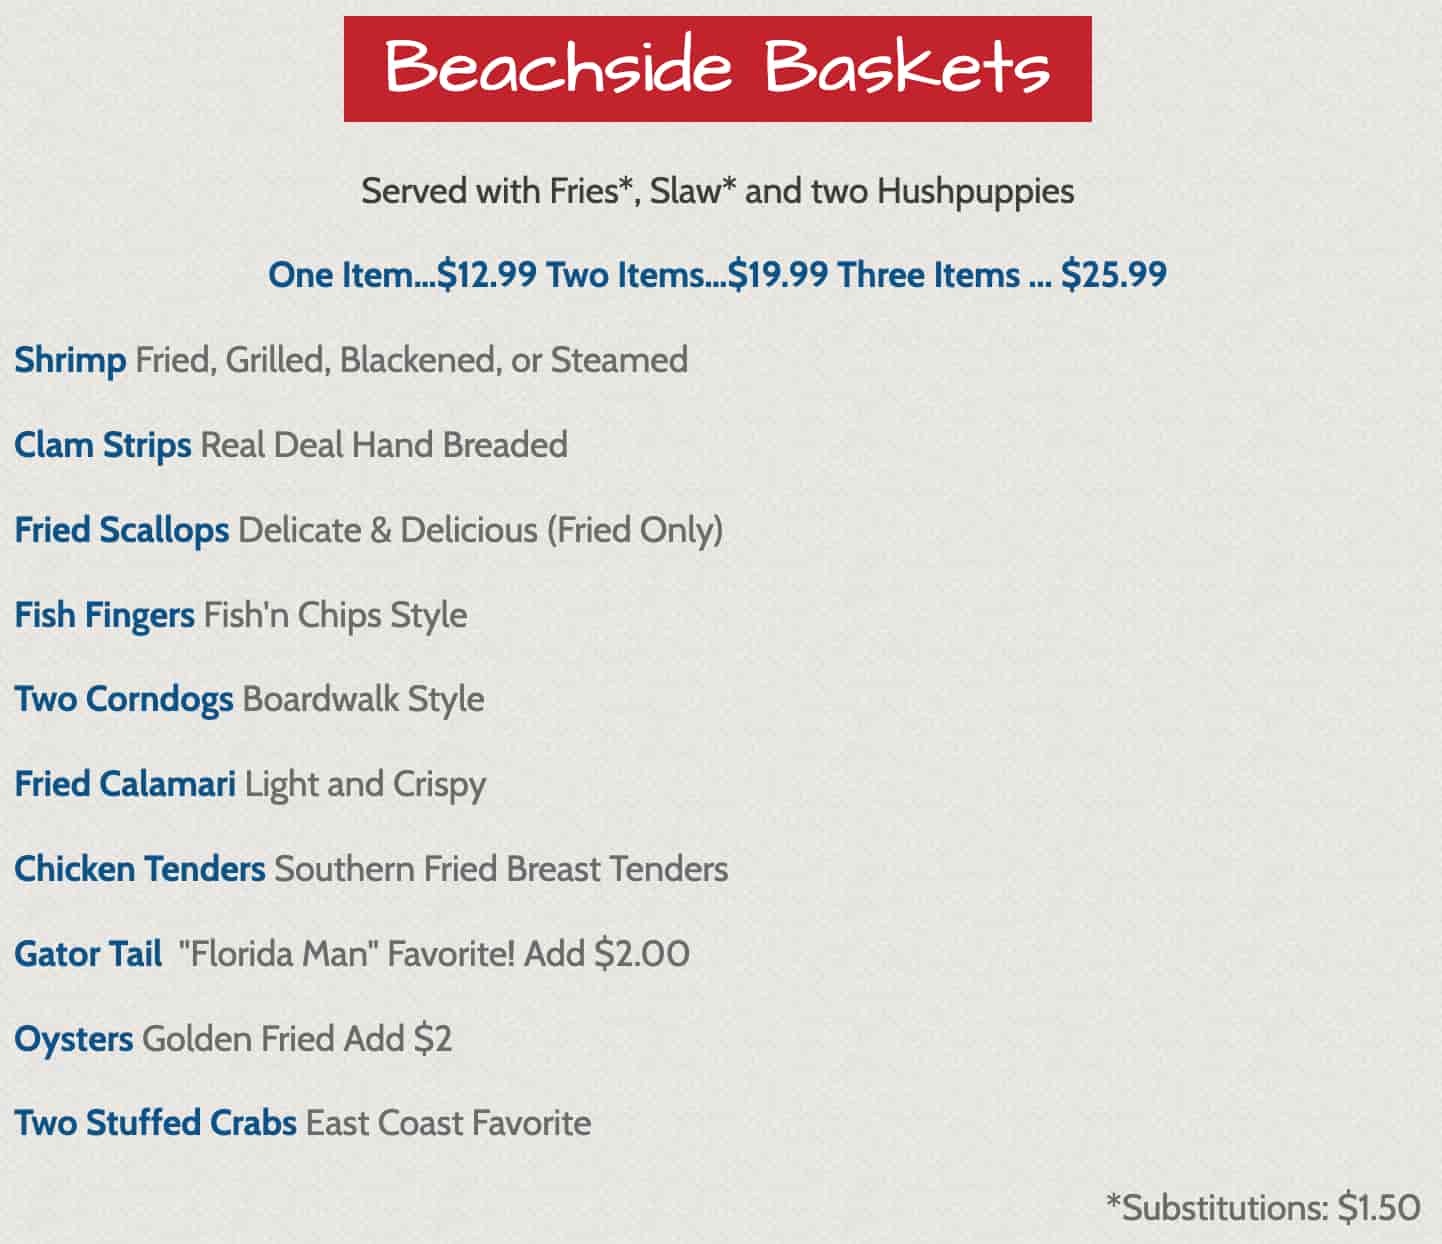 Beachside Seafood Restaurant and Market Platters and Baskets Menu